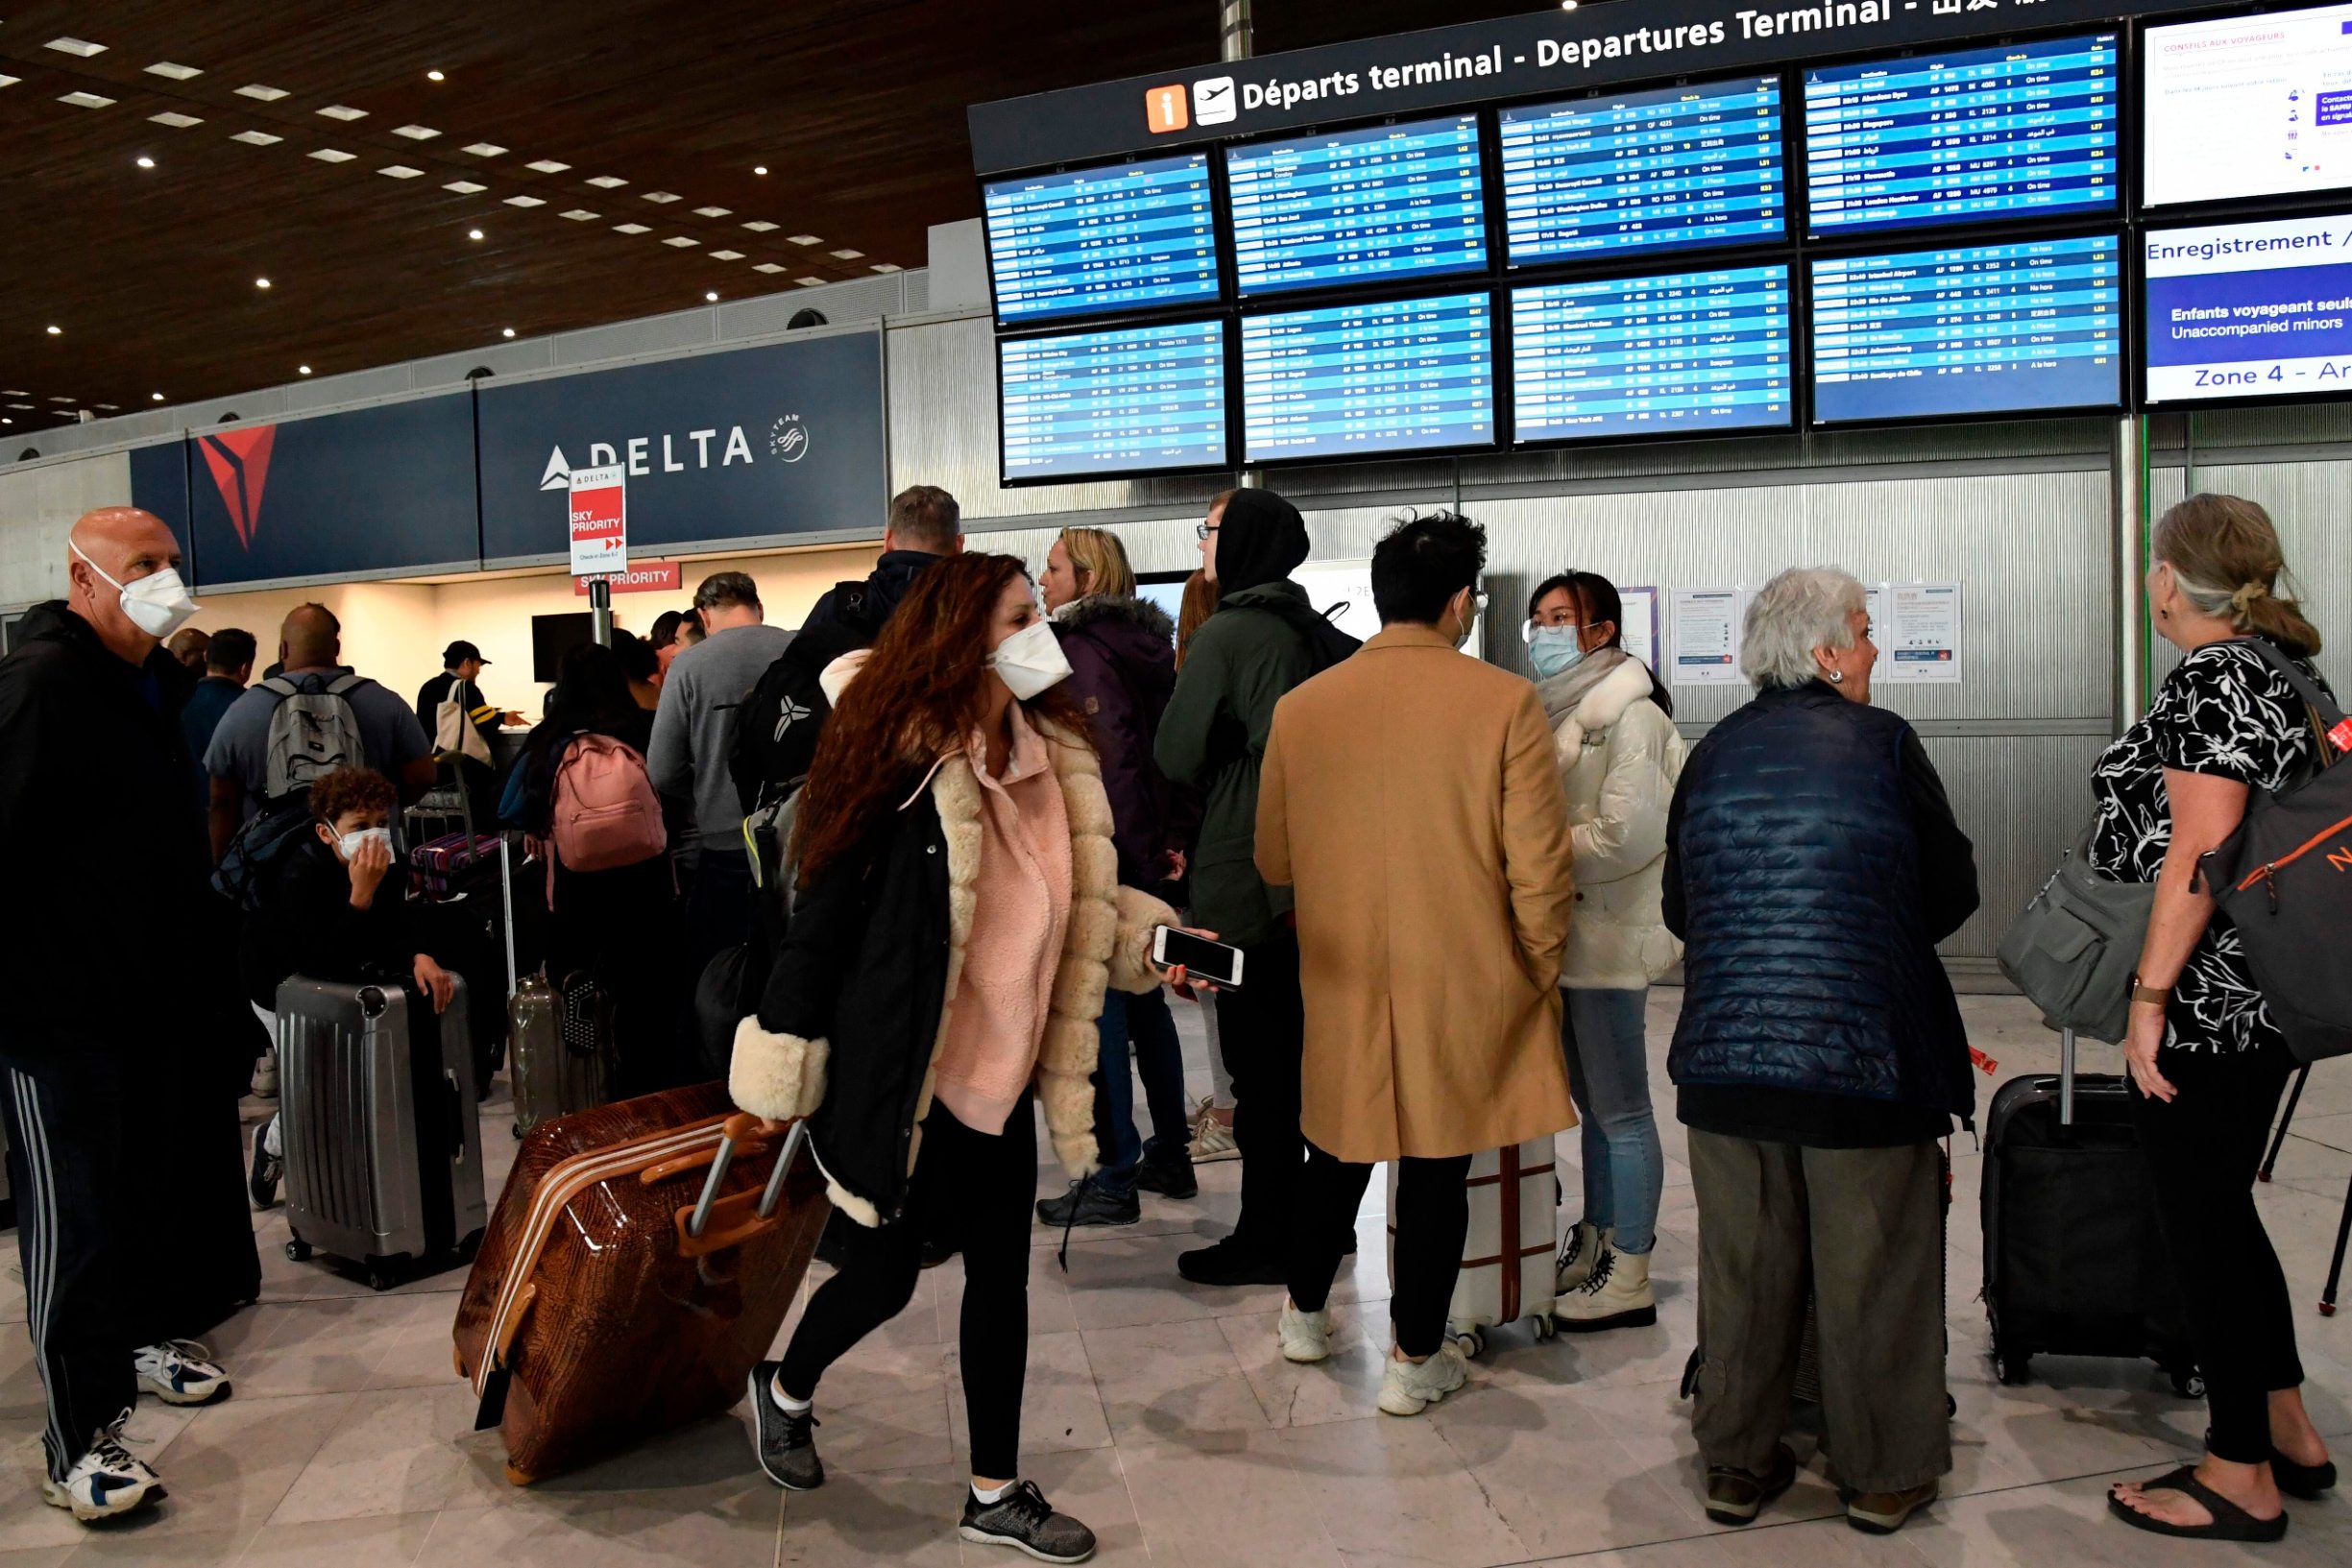 A traveller with a protective face mask pass by other standing in front of screens displaying departures flights at Paris-Charles-de-Gaulle airport after a US 30-day ban on travel from Europe due to the COVID-19 spread in Roissy-en-France on March 12, 2020. - US President Donald Trump announced on March 11, 2020 a shock 30-day ban on travel from mainland Europe over the coronavirus pandemic that has sparked unprecedented lockdowns, widespread panic and another financial market meltdown. (Photo by Bertrand GUAY / AFP)